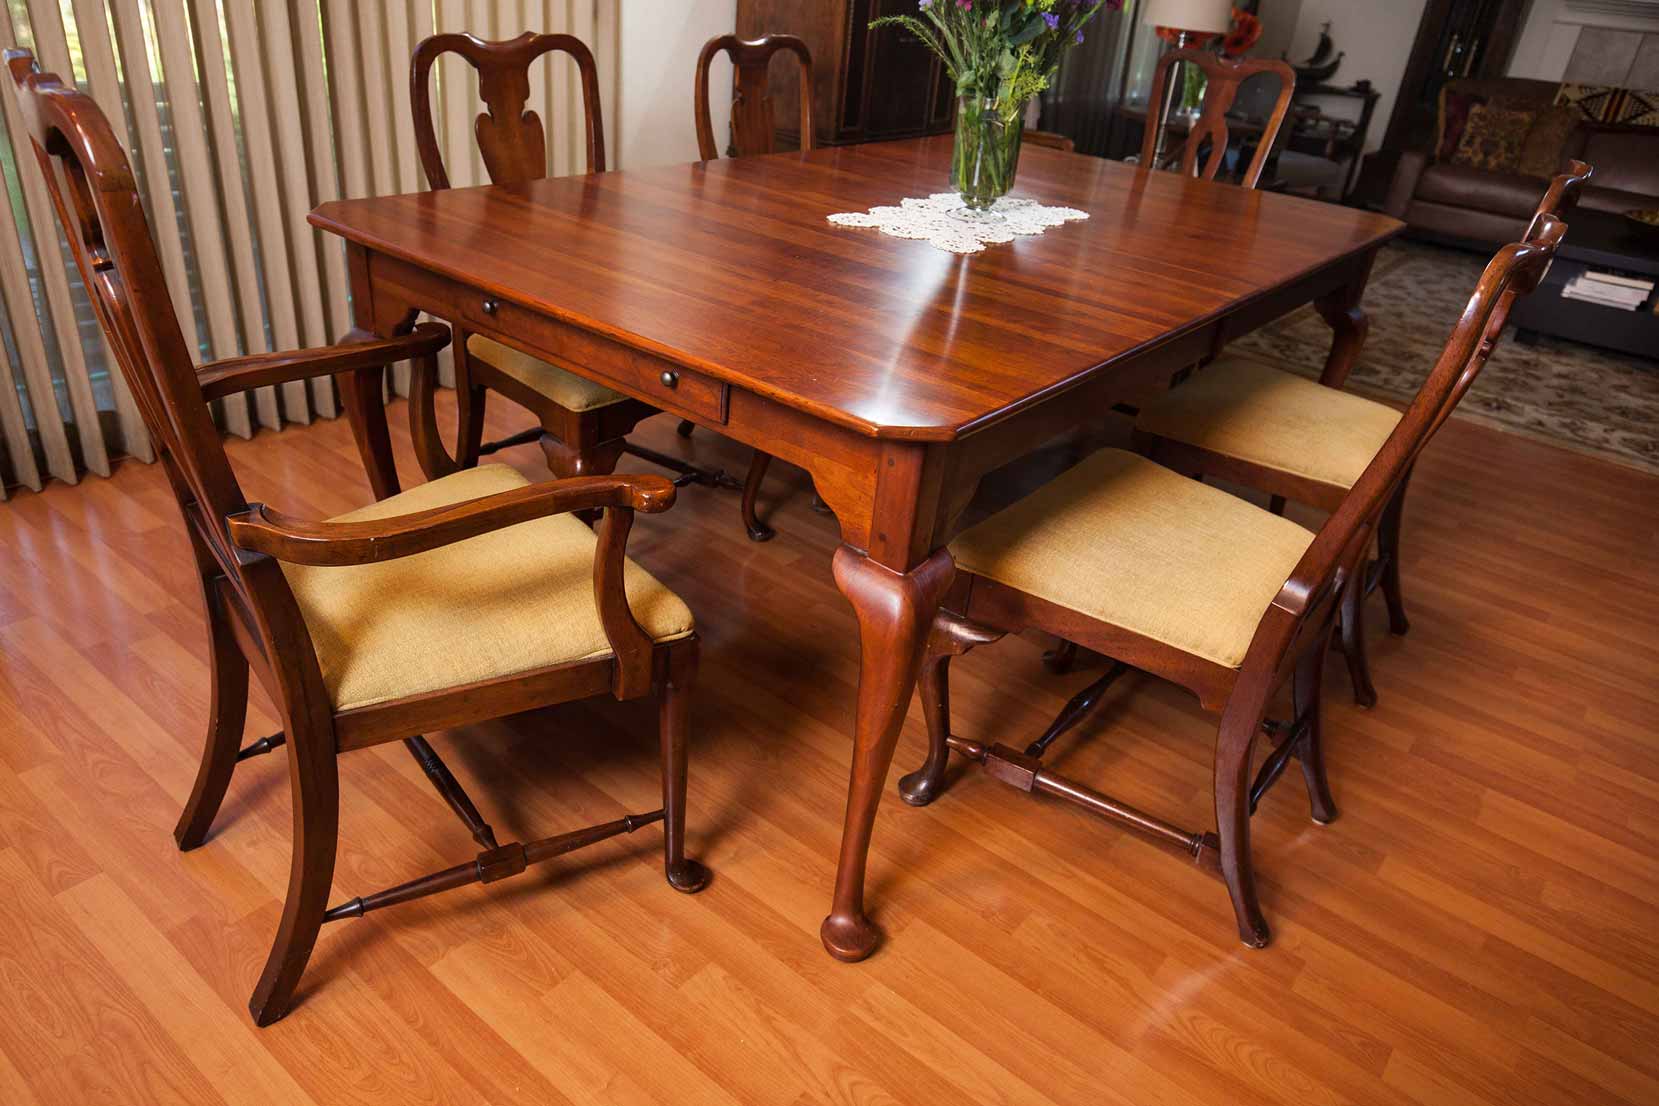 How To Fix A Wobbly Dining Table